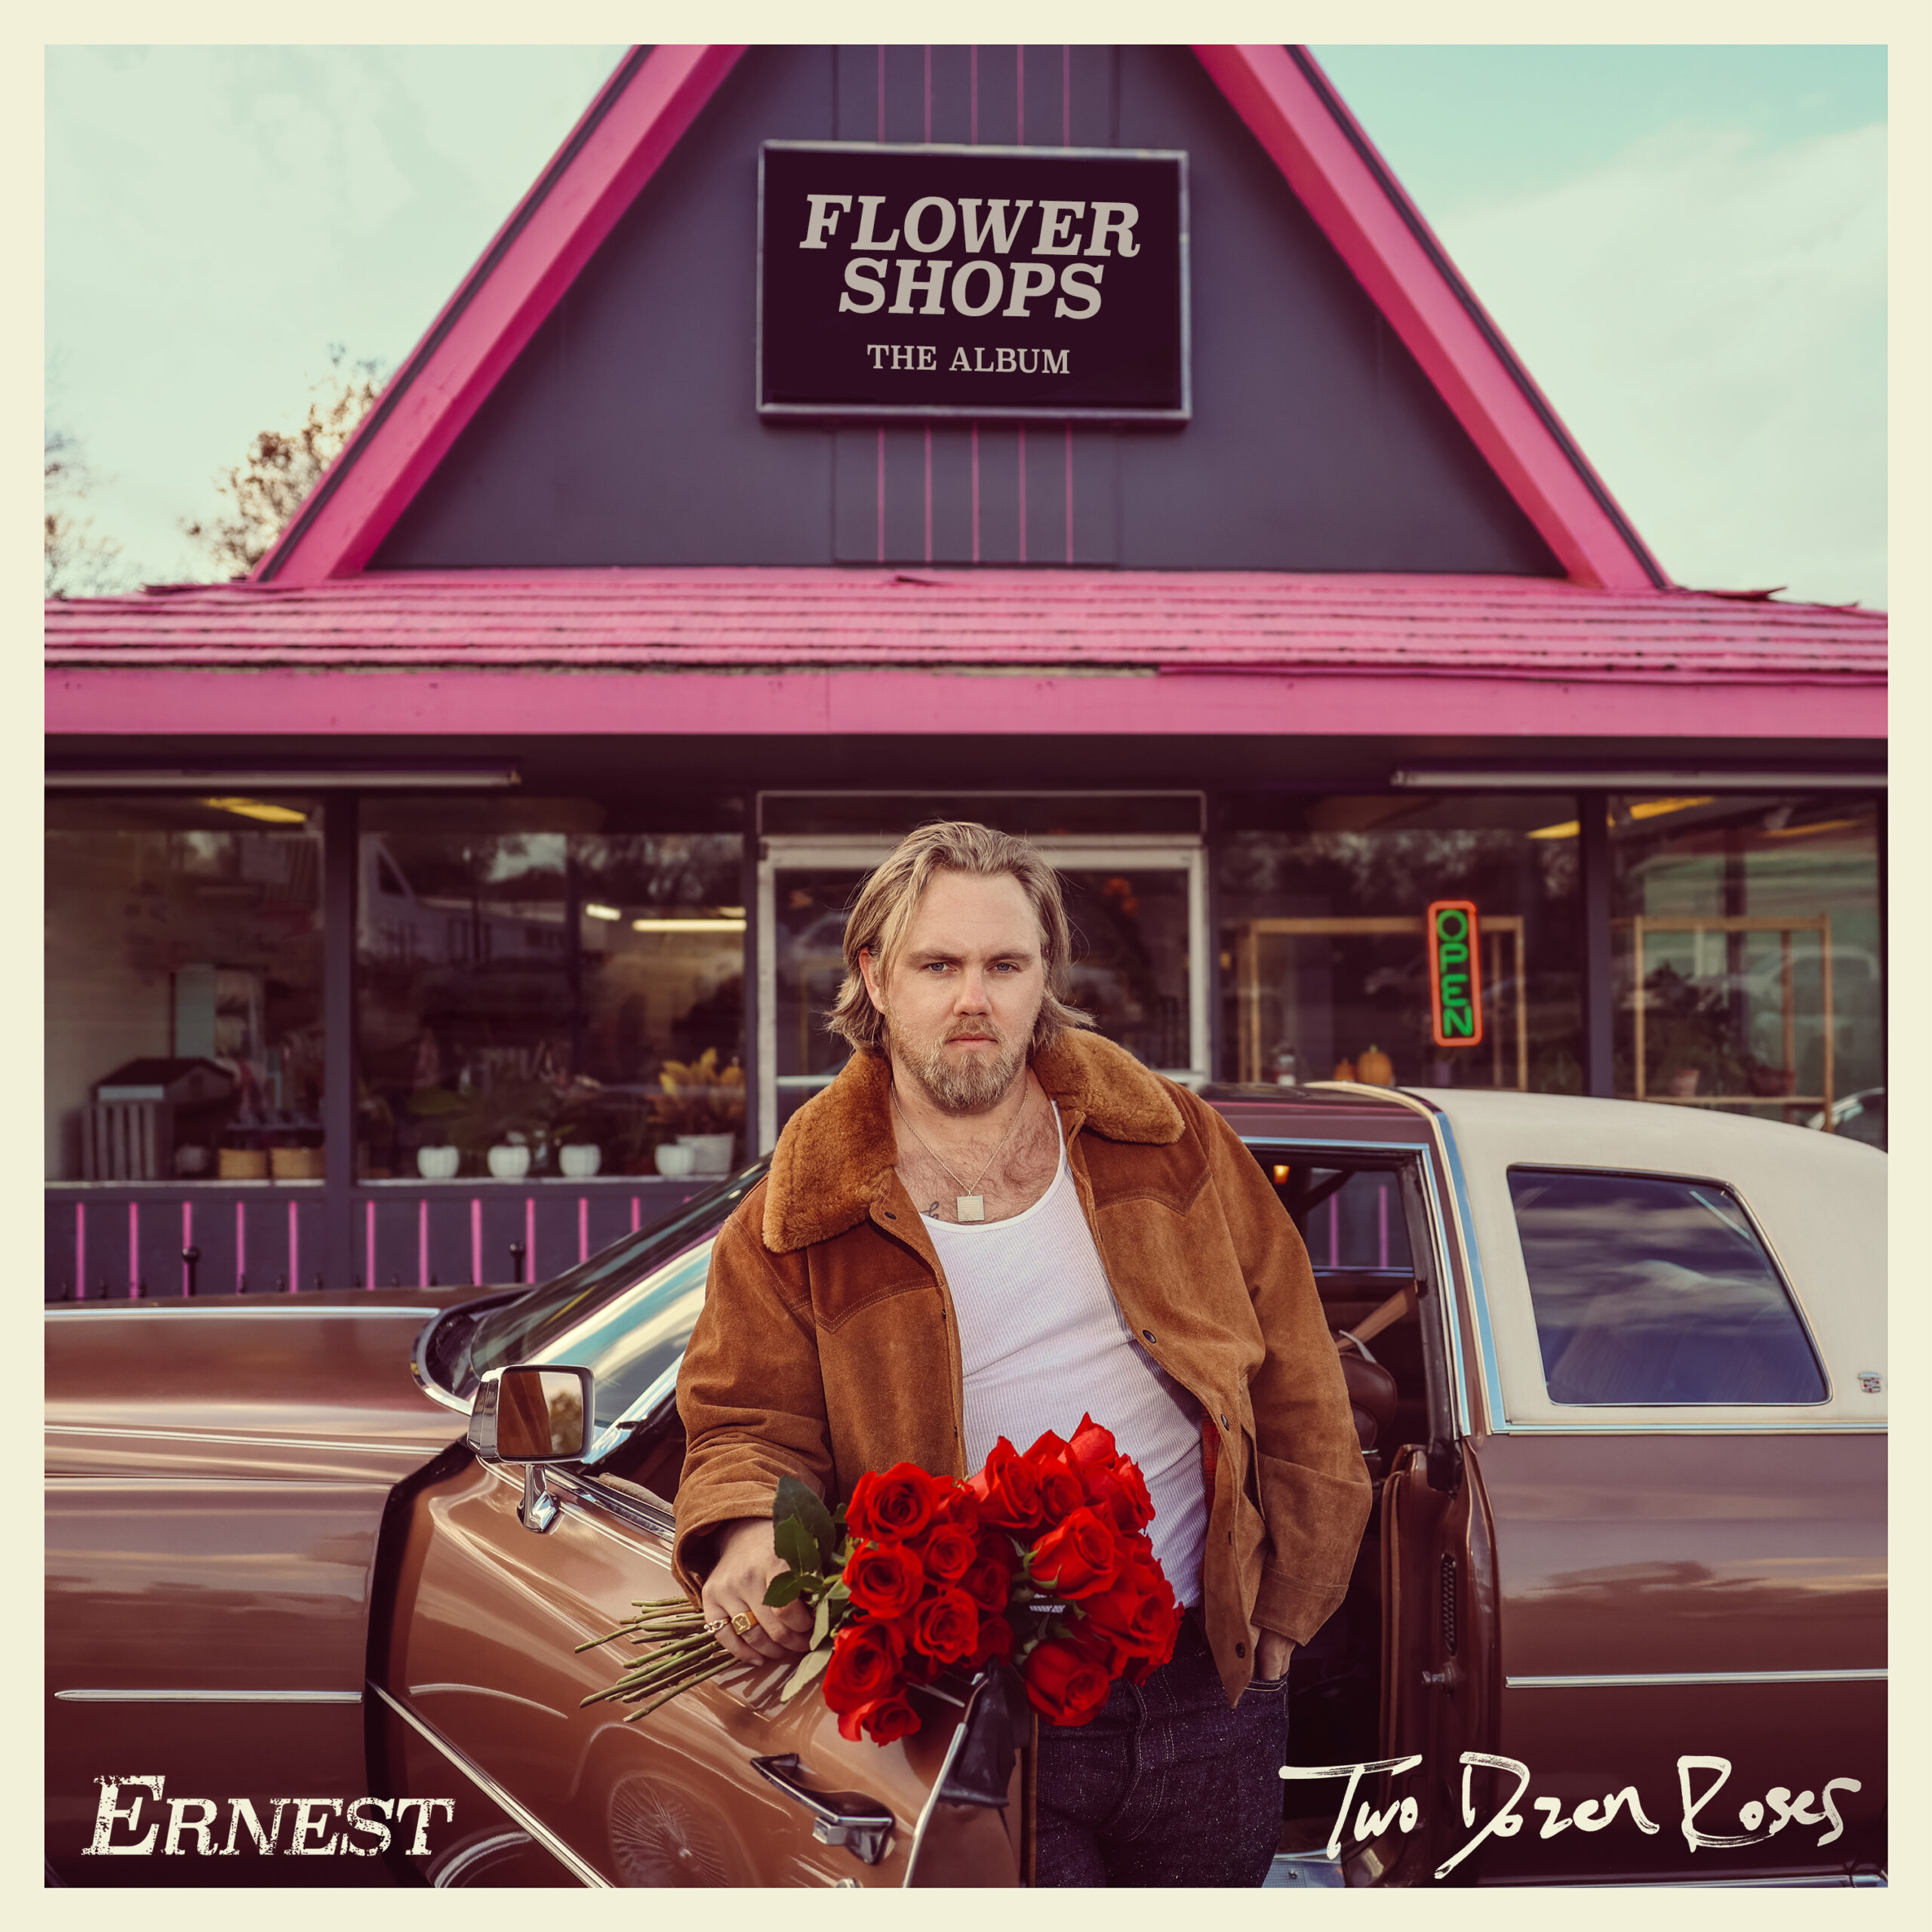 New Music Friday: ERNEST Releases “FLOWER SHOPS (THE ALBUM): Two Dozen Roses,” Serving as ‘an Ode to the Stuff He Loved Growing Up’